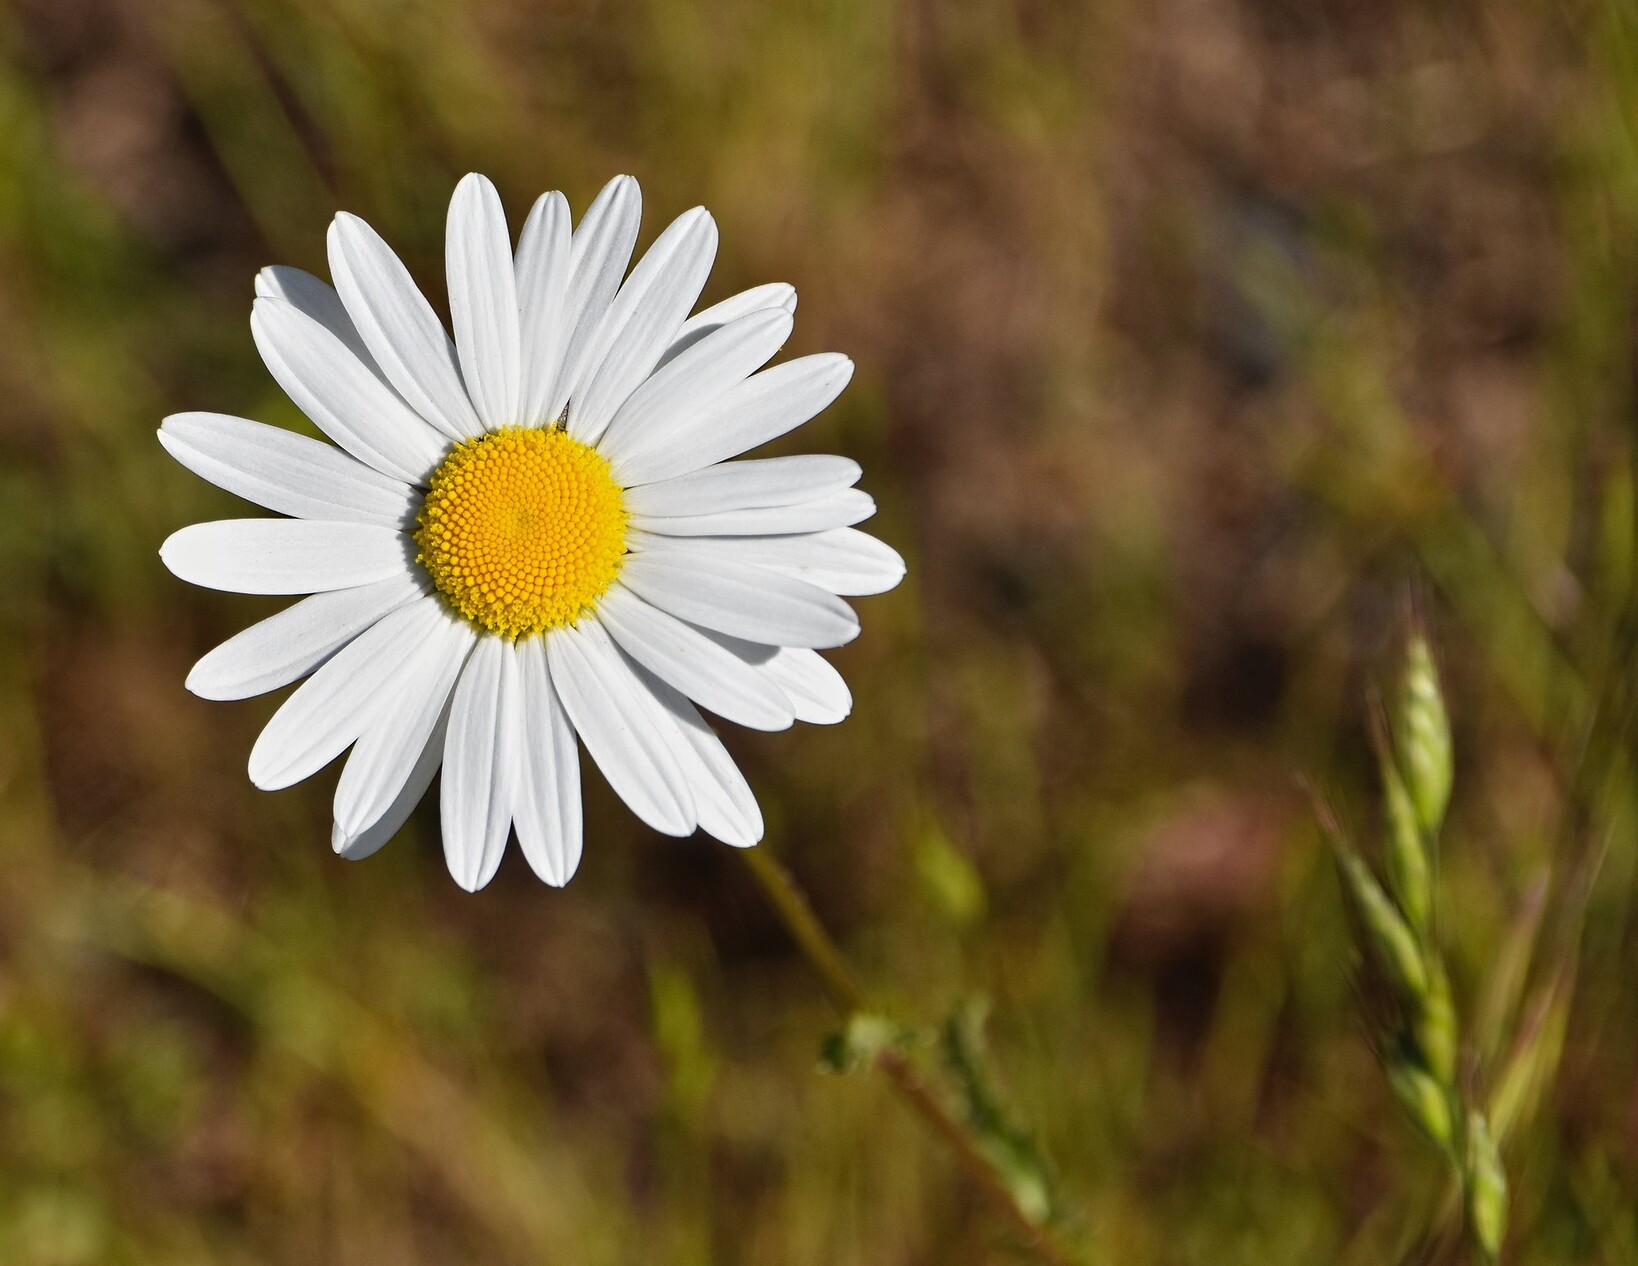 A white daisy with a yellow middle